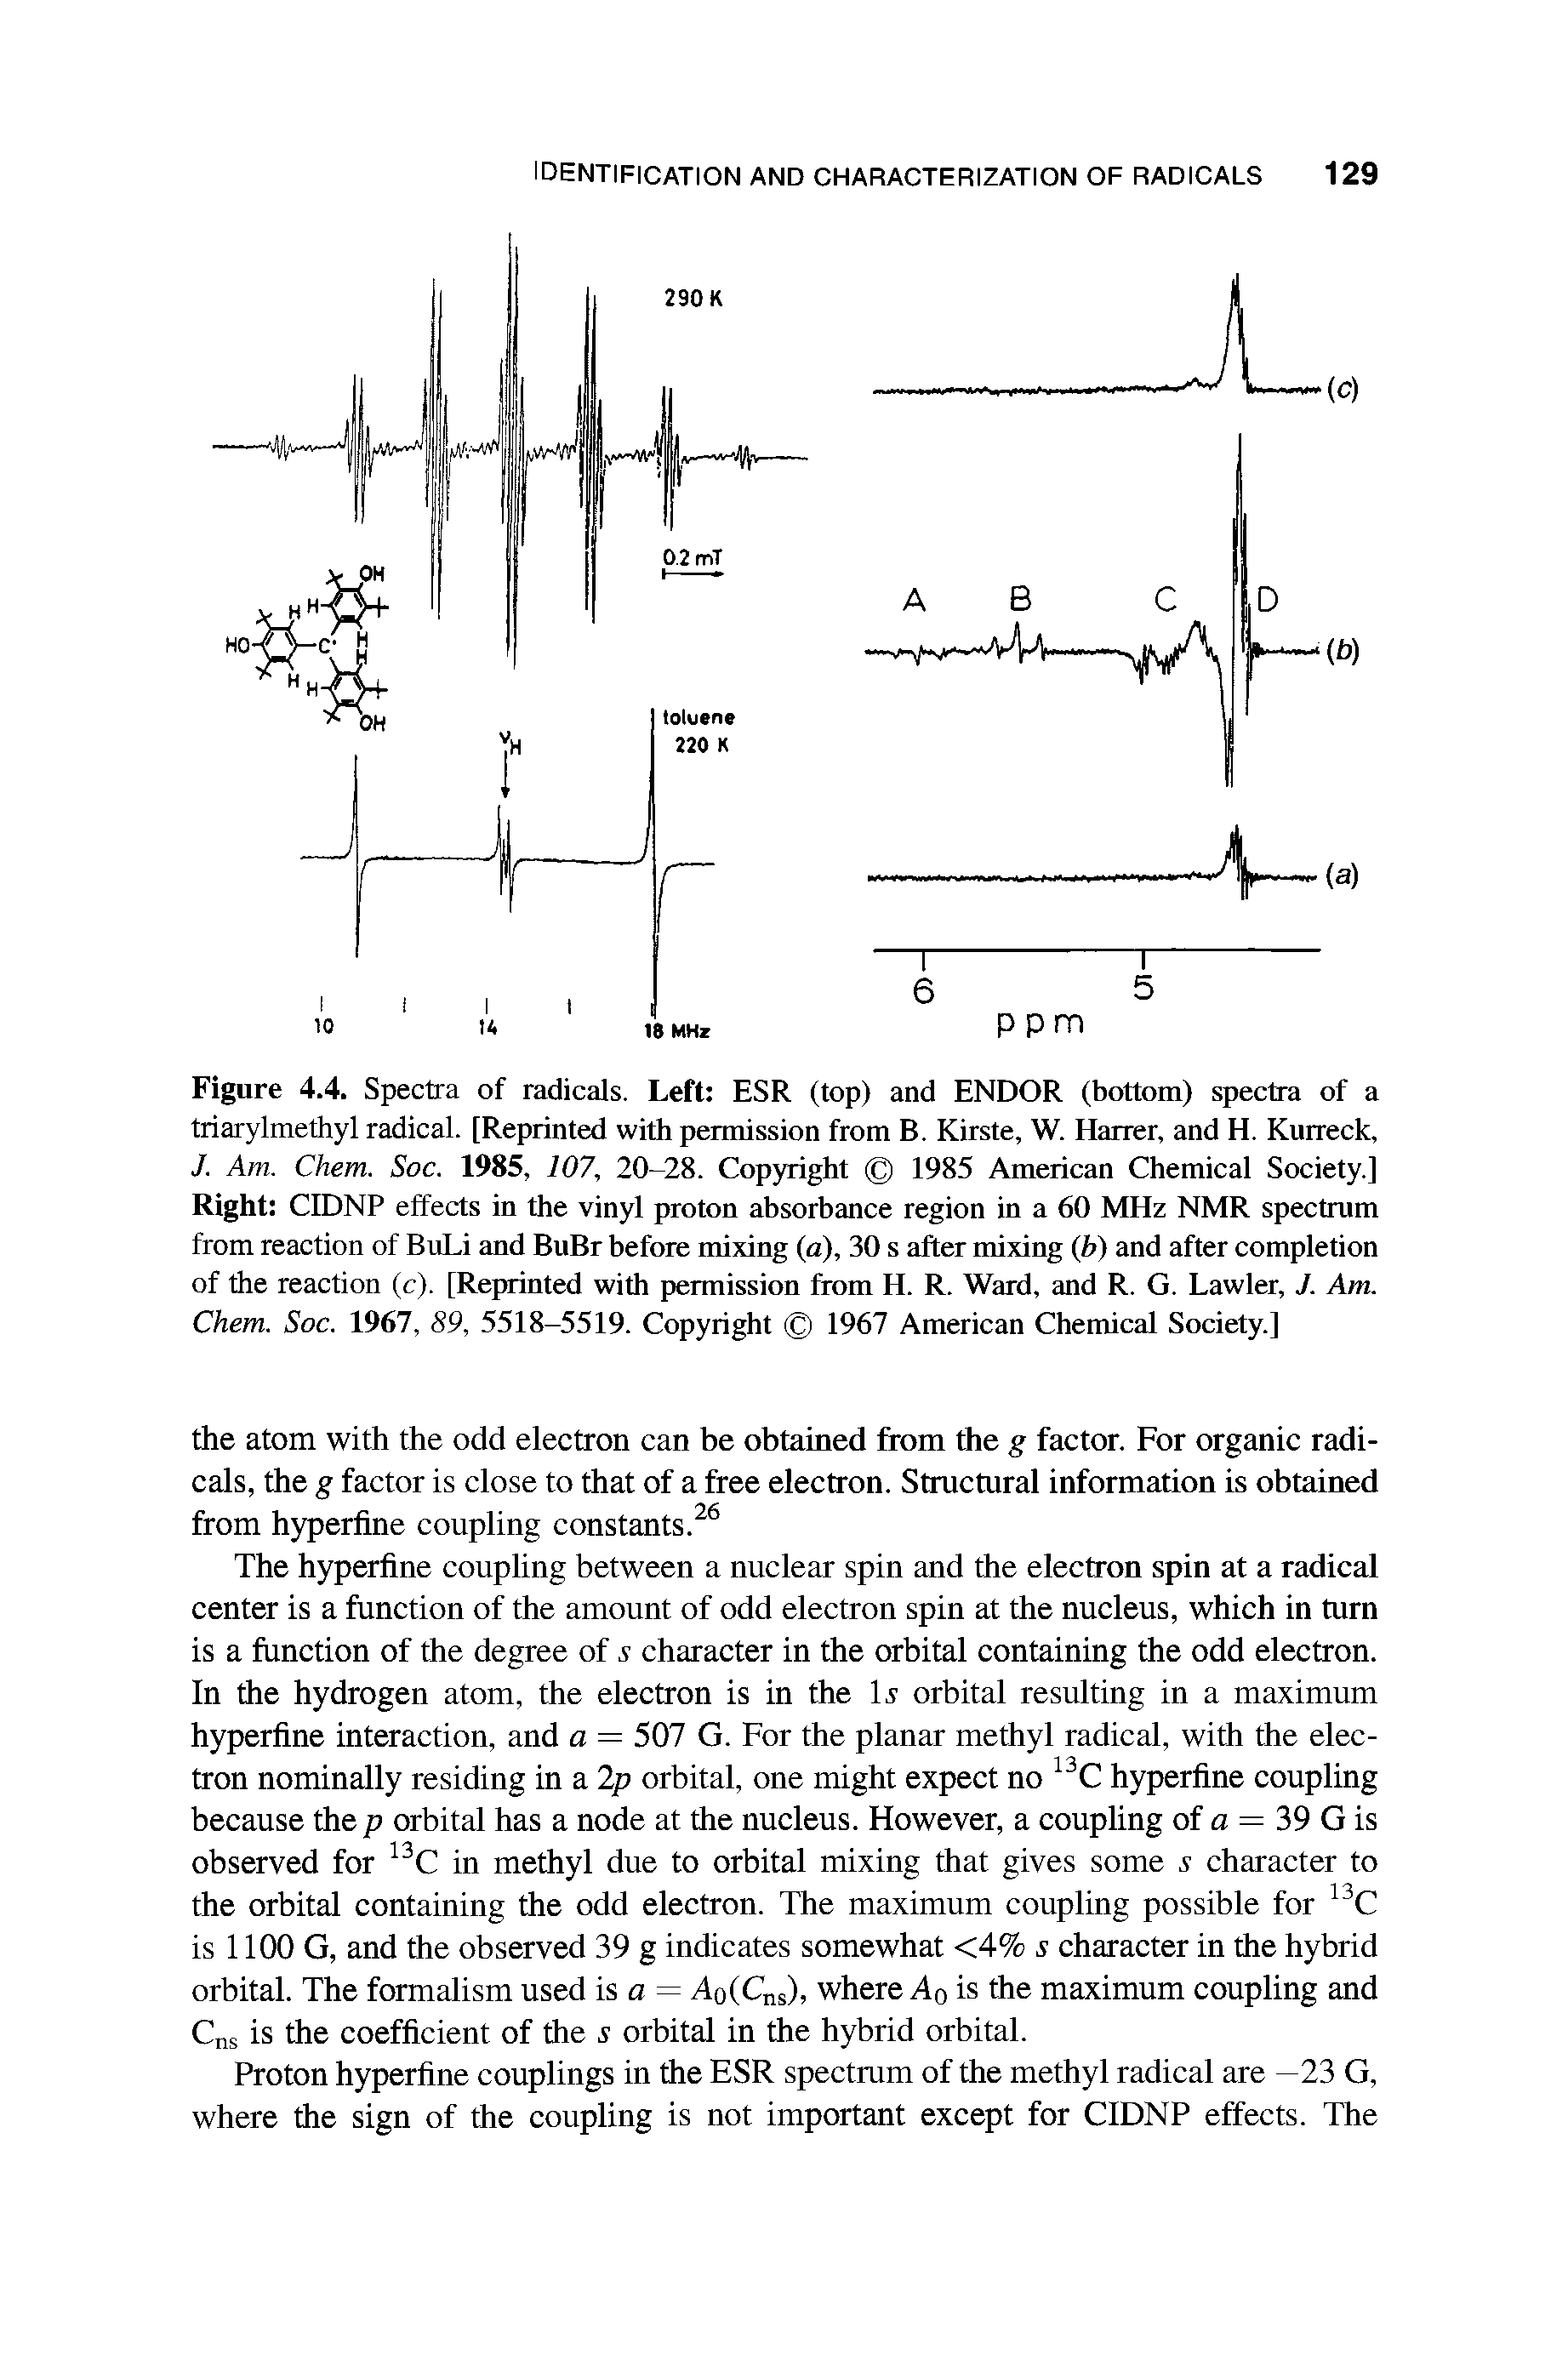 Figure 4.4. Spectra of radicals. Left ESR (top) and ENDOR (bottom) spectra of a triarylmethyl radical. [Reprinted with permission from B. Kirste, W. Harrer, and H. Kurreck, J. Am. Chem. Soc. 1985, 107, 20-28. Copyright 1985 American Chemical Society.] Right CIDNP effects in the vinyl proton absorbance region in a 60 MHz NMR spectrum from reaction of BuLi and BuBr before mixing (a), 30 s after mixing (b) and after completion of the reaction (c). [Reprinted with permission from H. R. Ward, and R. G. Lawler, J. Am. Chem. Soc. 1967, 89, 5518-5519. Copyright 1967 American Chemical Society.]...